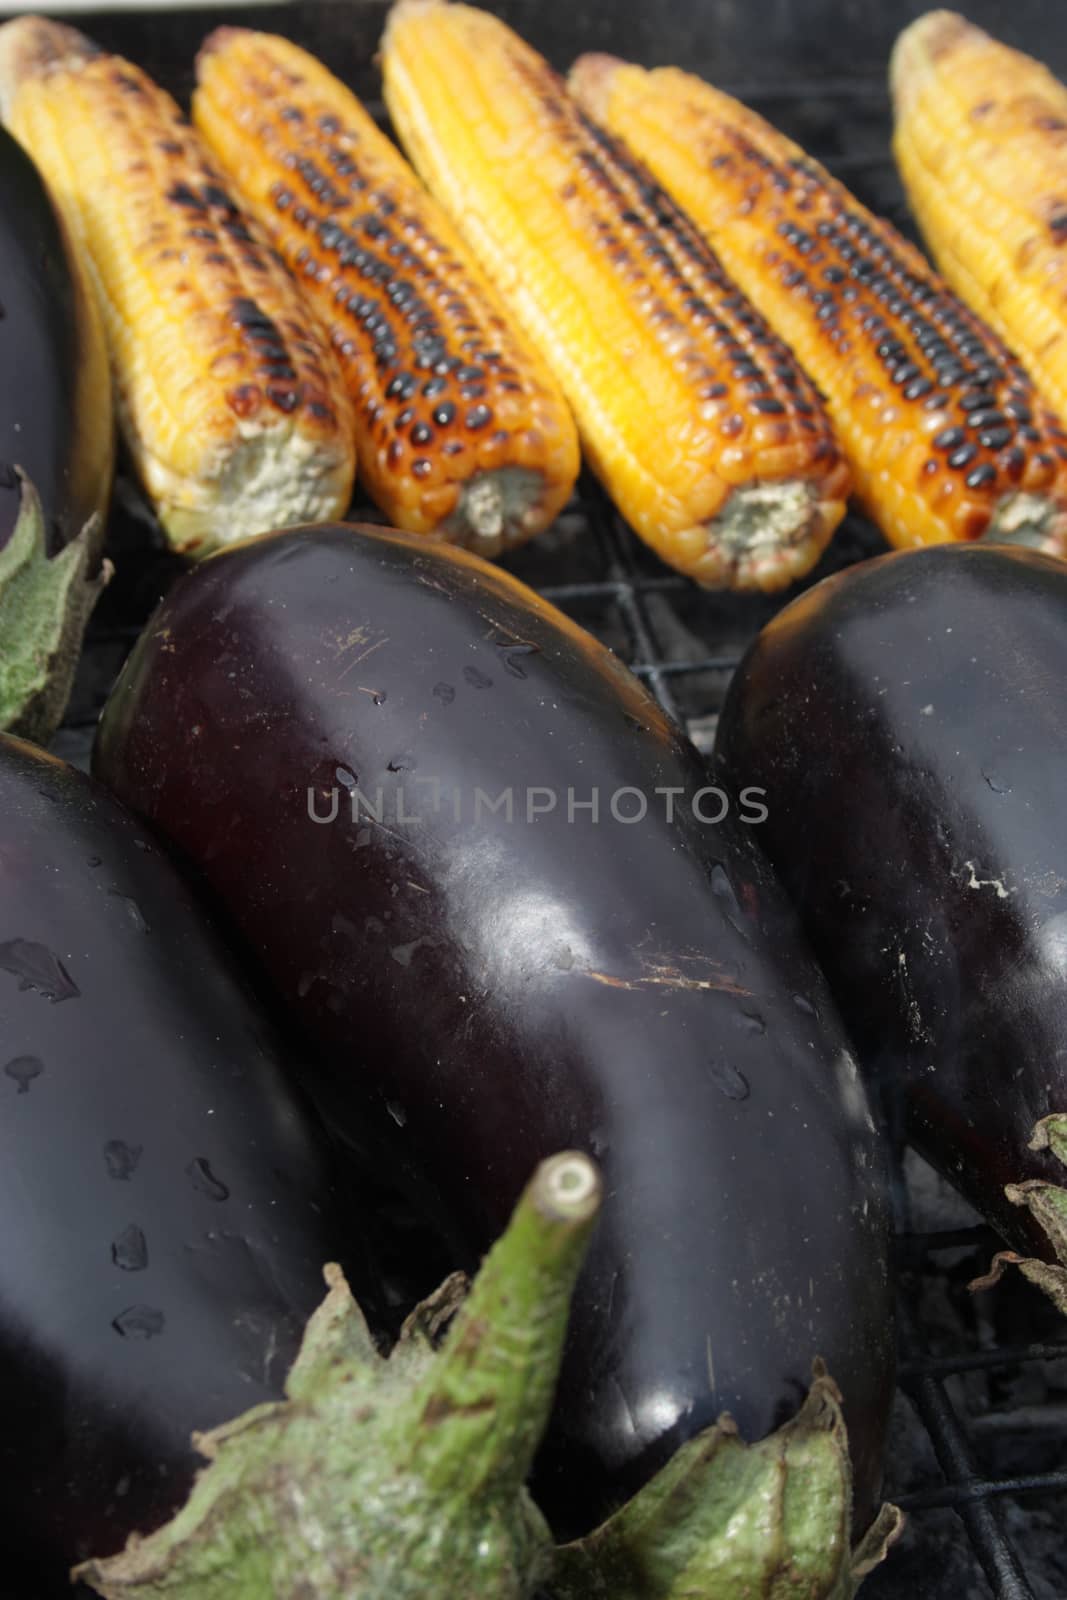 Barbecuing vegetables on charcoal fire closeup image. by eicvl5